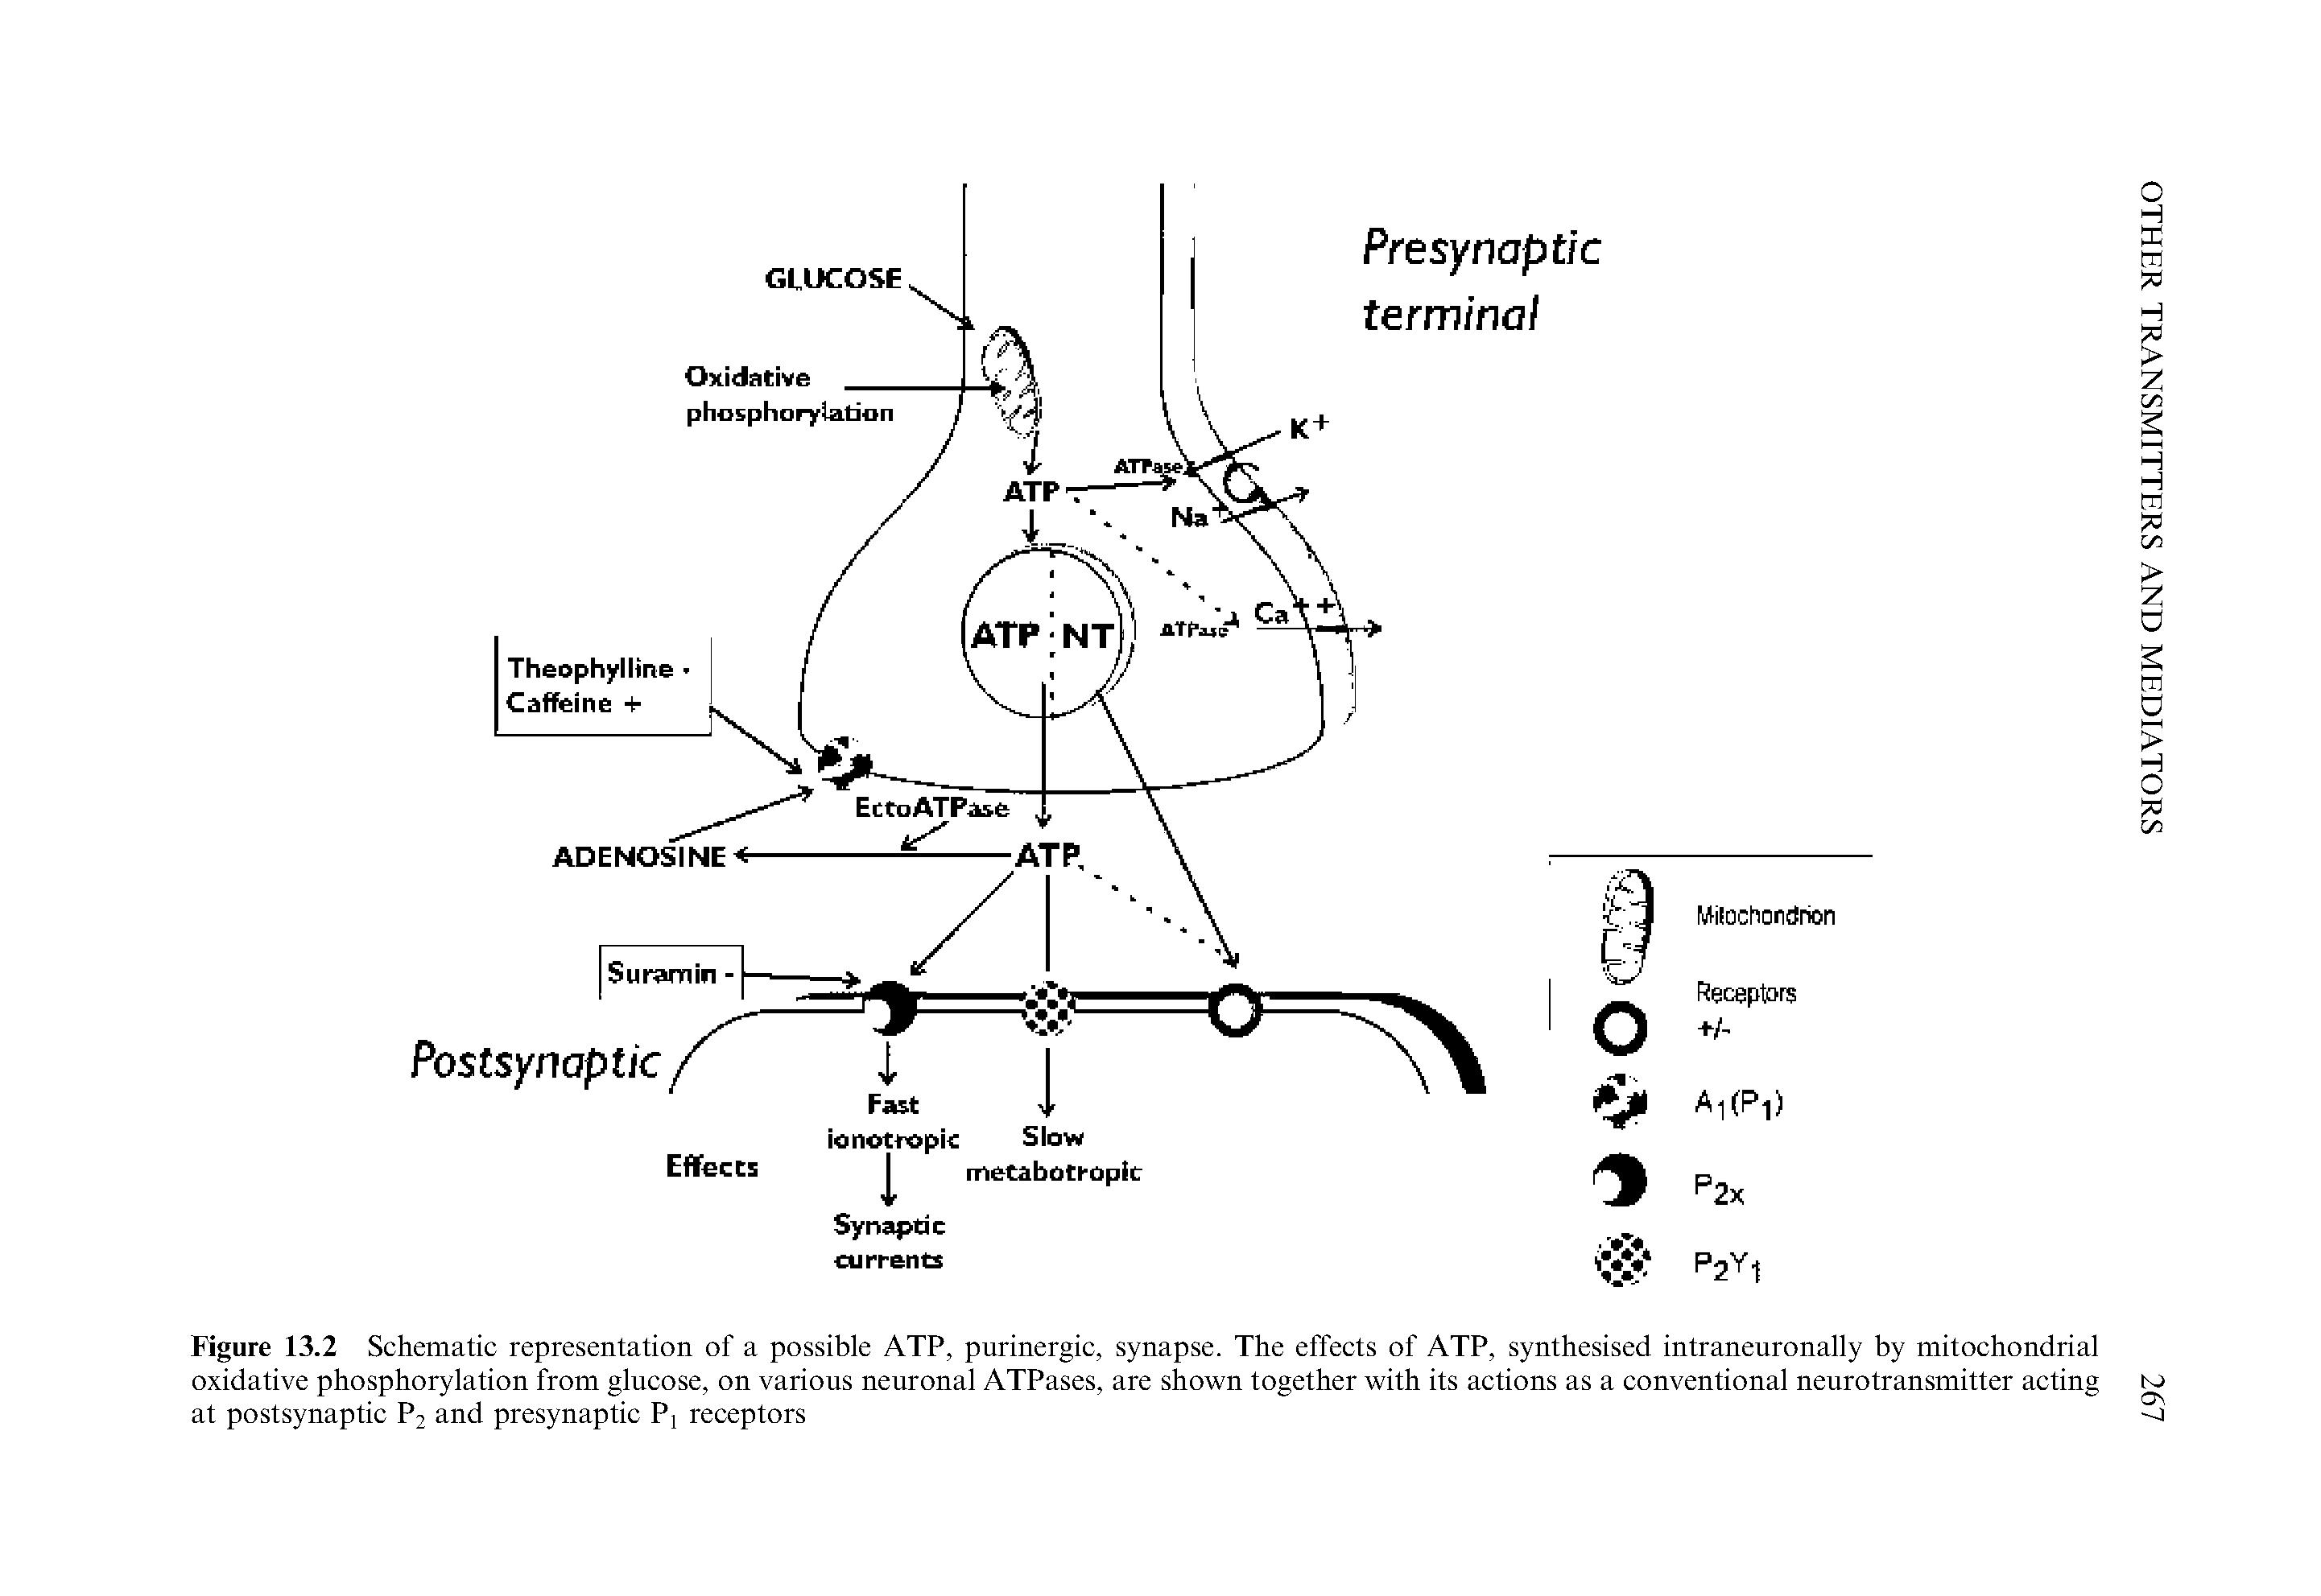 Figure 13.2 Schematic representation of a possible ATP, purinergic, synapse. The effects of ATP, synthesised intraneuronally by mitochondrial oxidative phosphorylation from glucose, on various neuronal ATPases, are shown together with its actions as a conventional neurotransmitter acting at postsynaptic P2 and presynaptic Pj receptors...